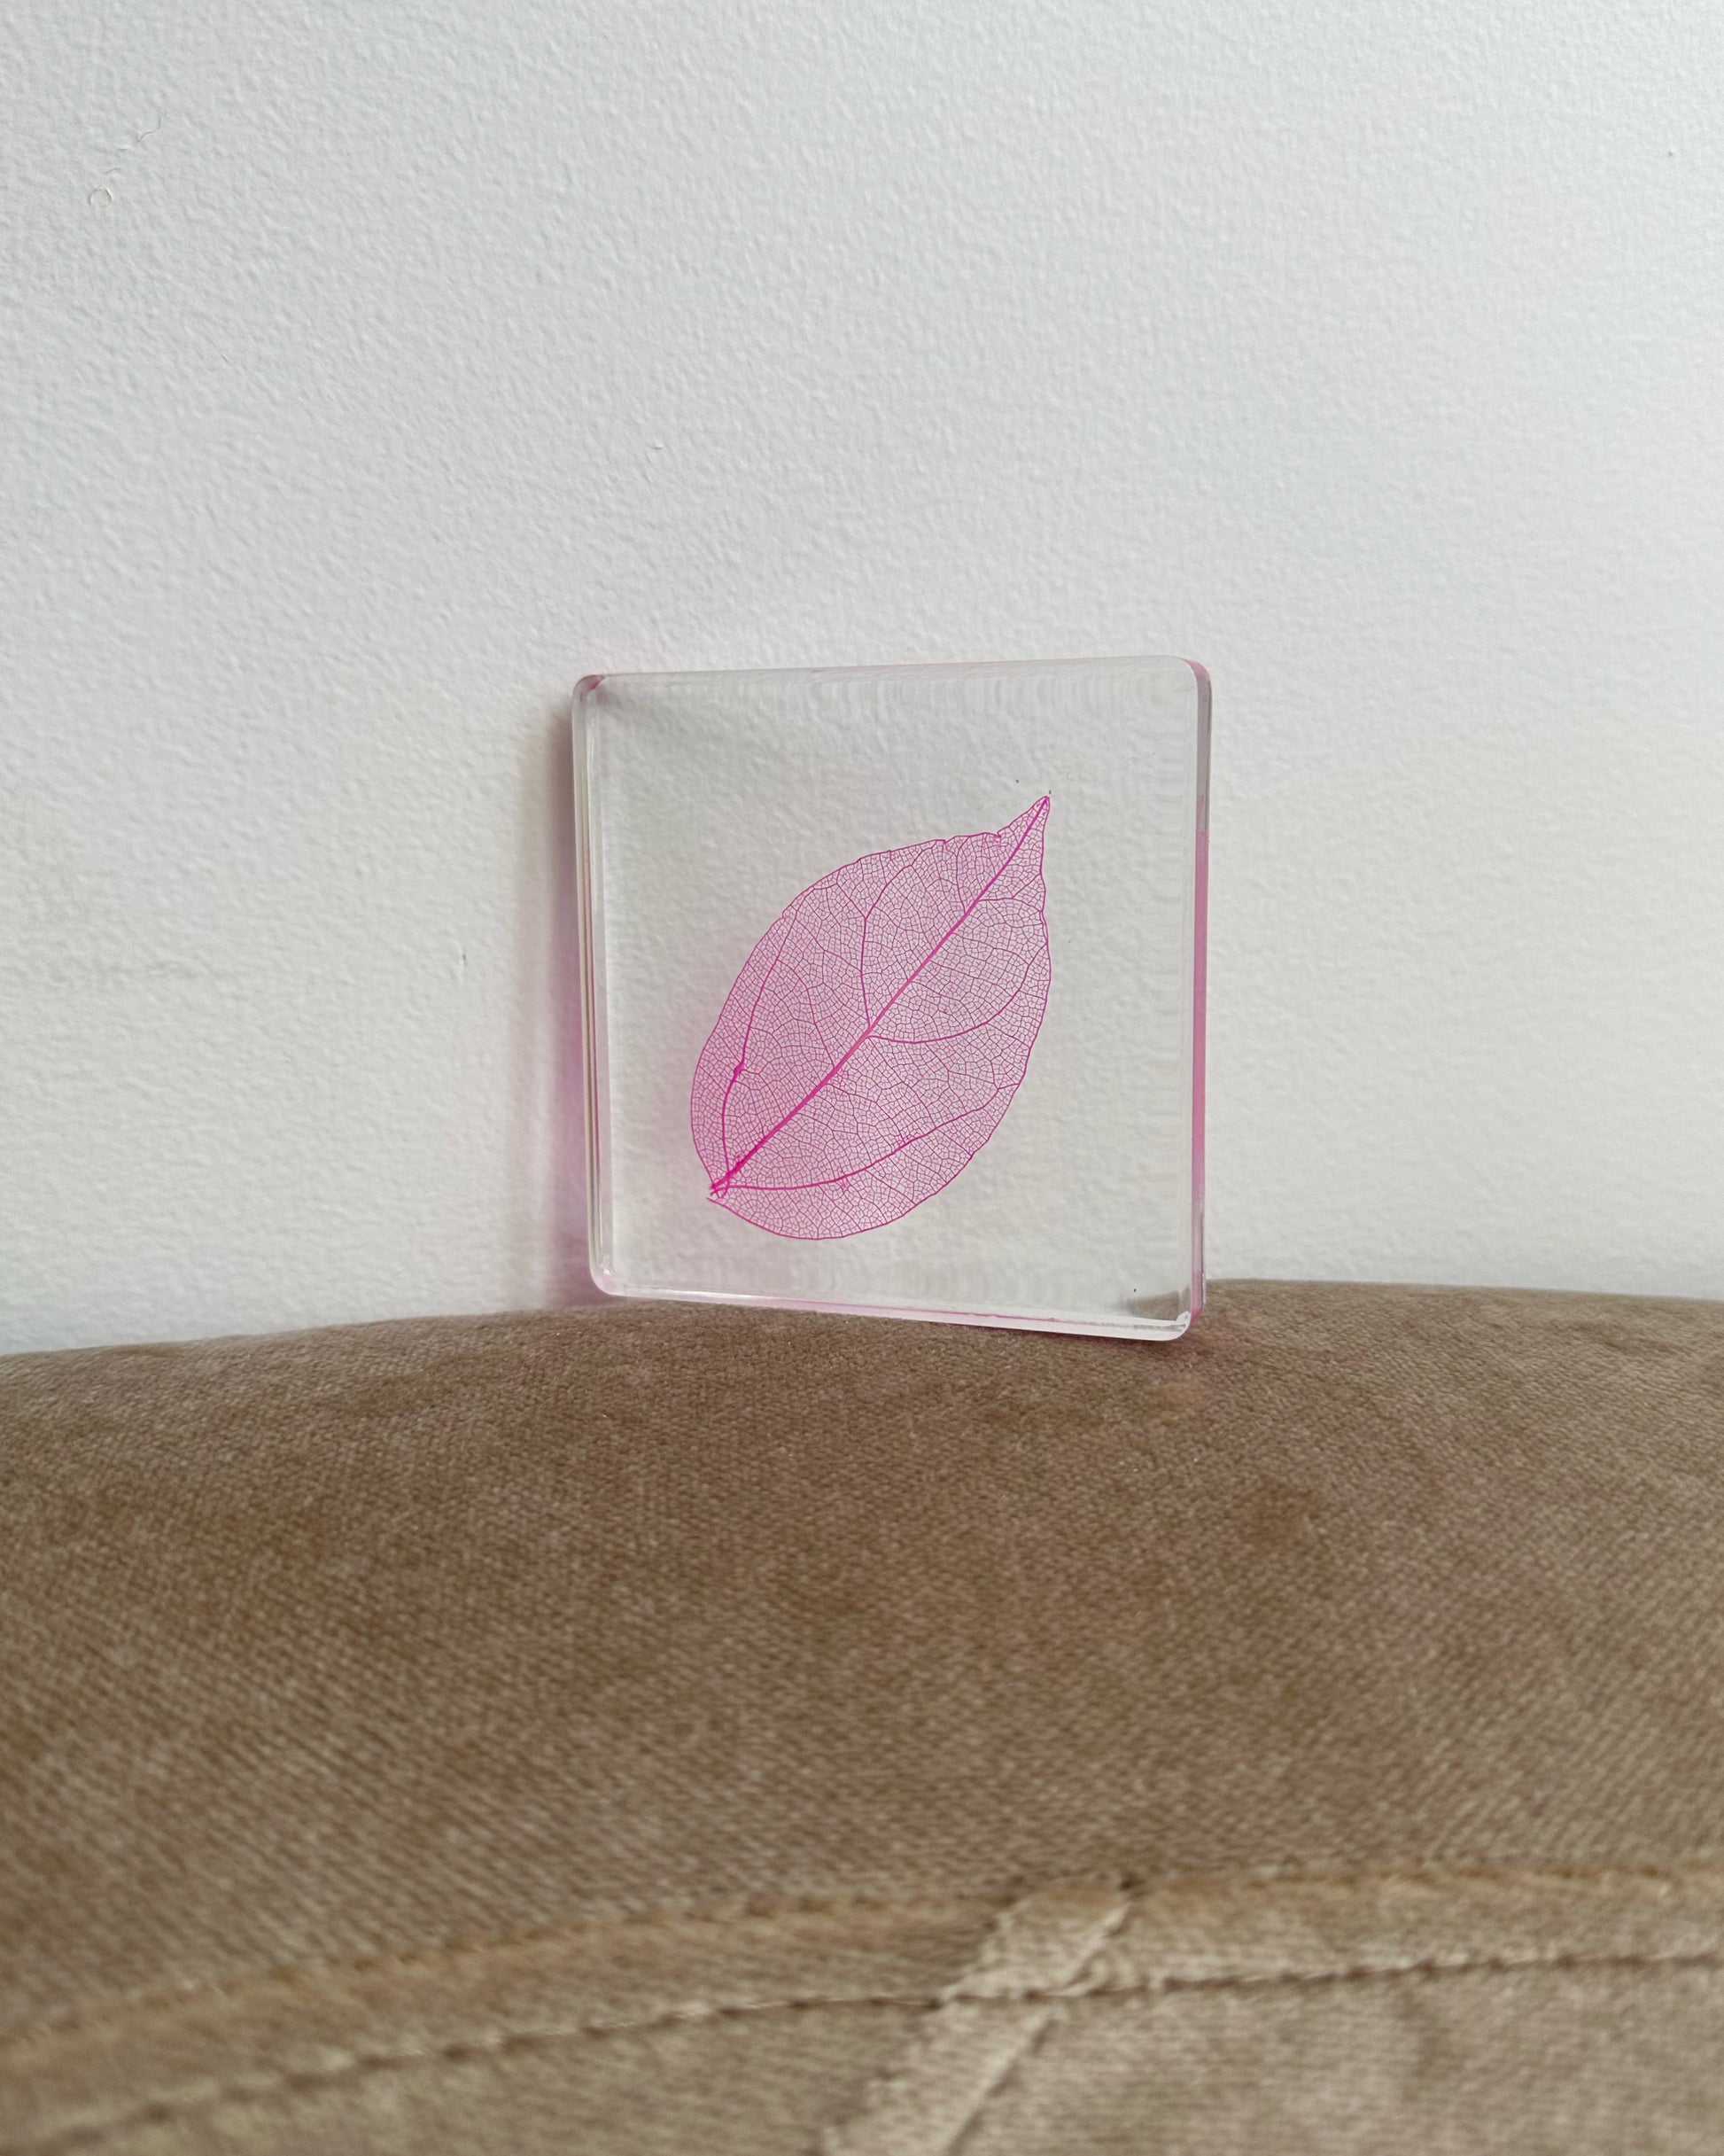 Magnolia leaves suspended in a resin square coaster